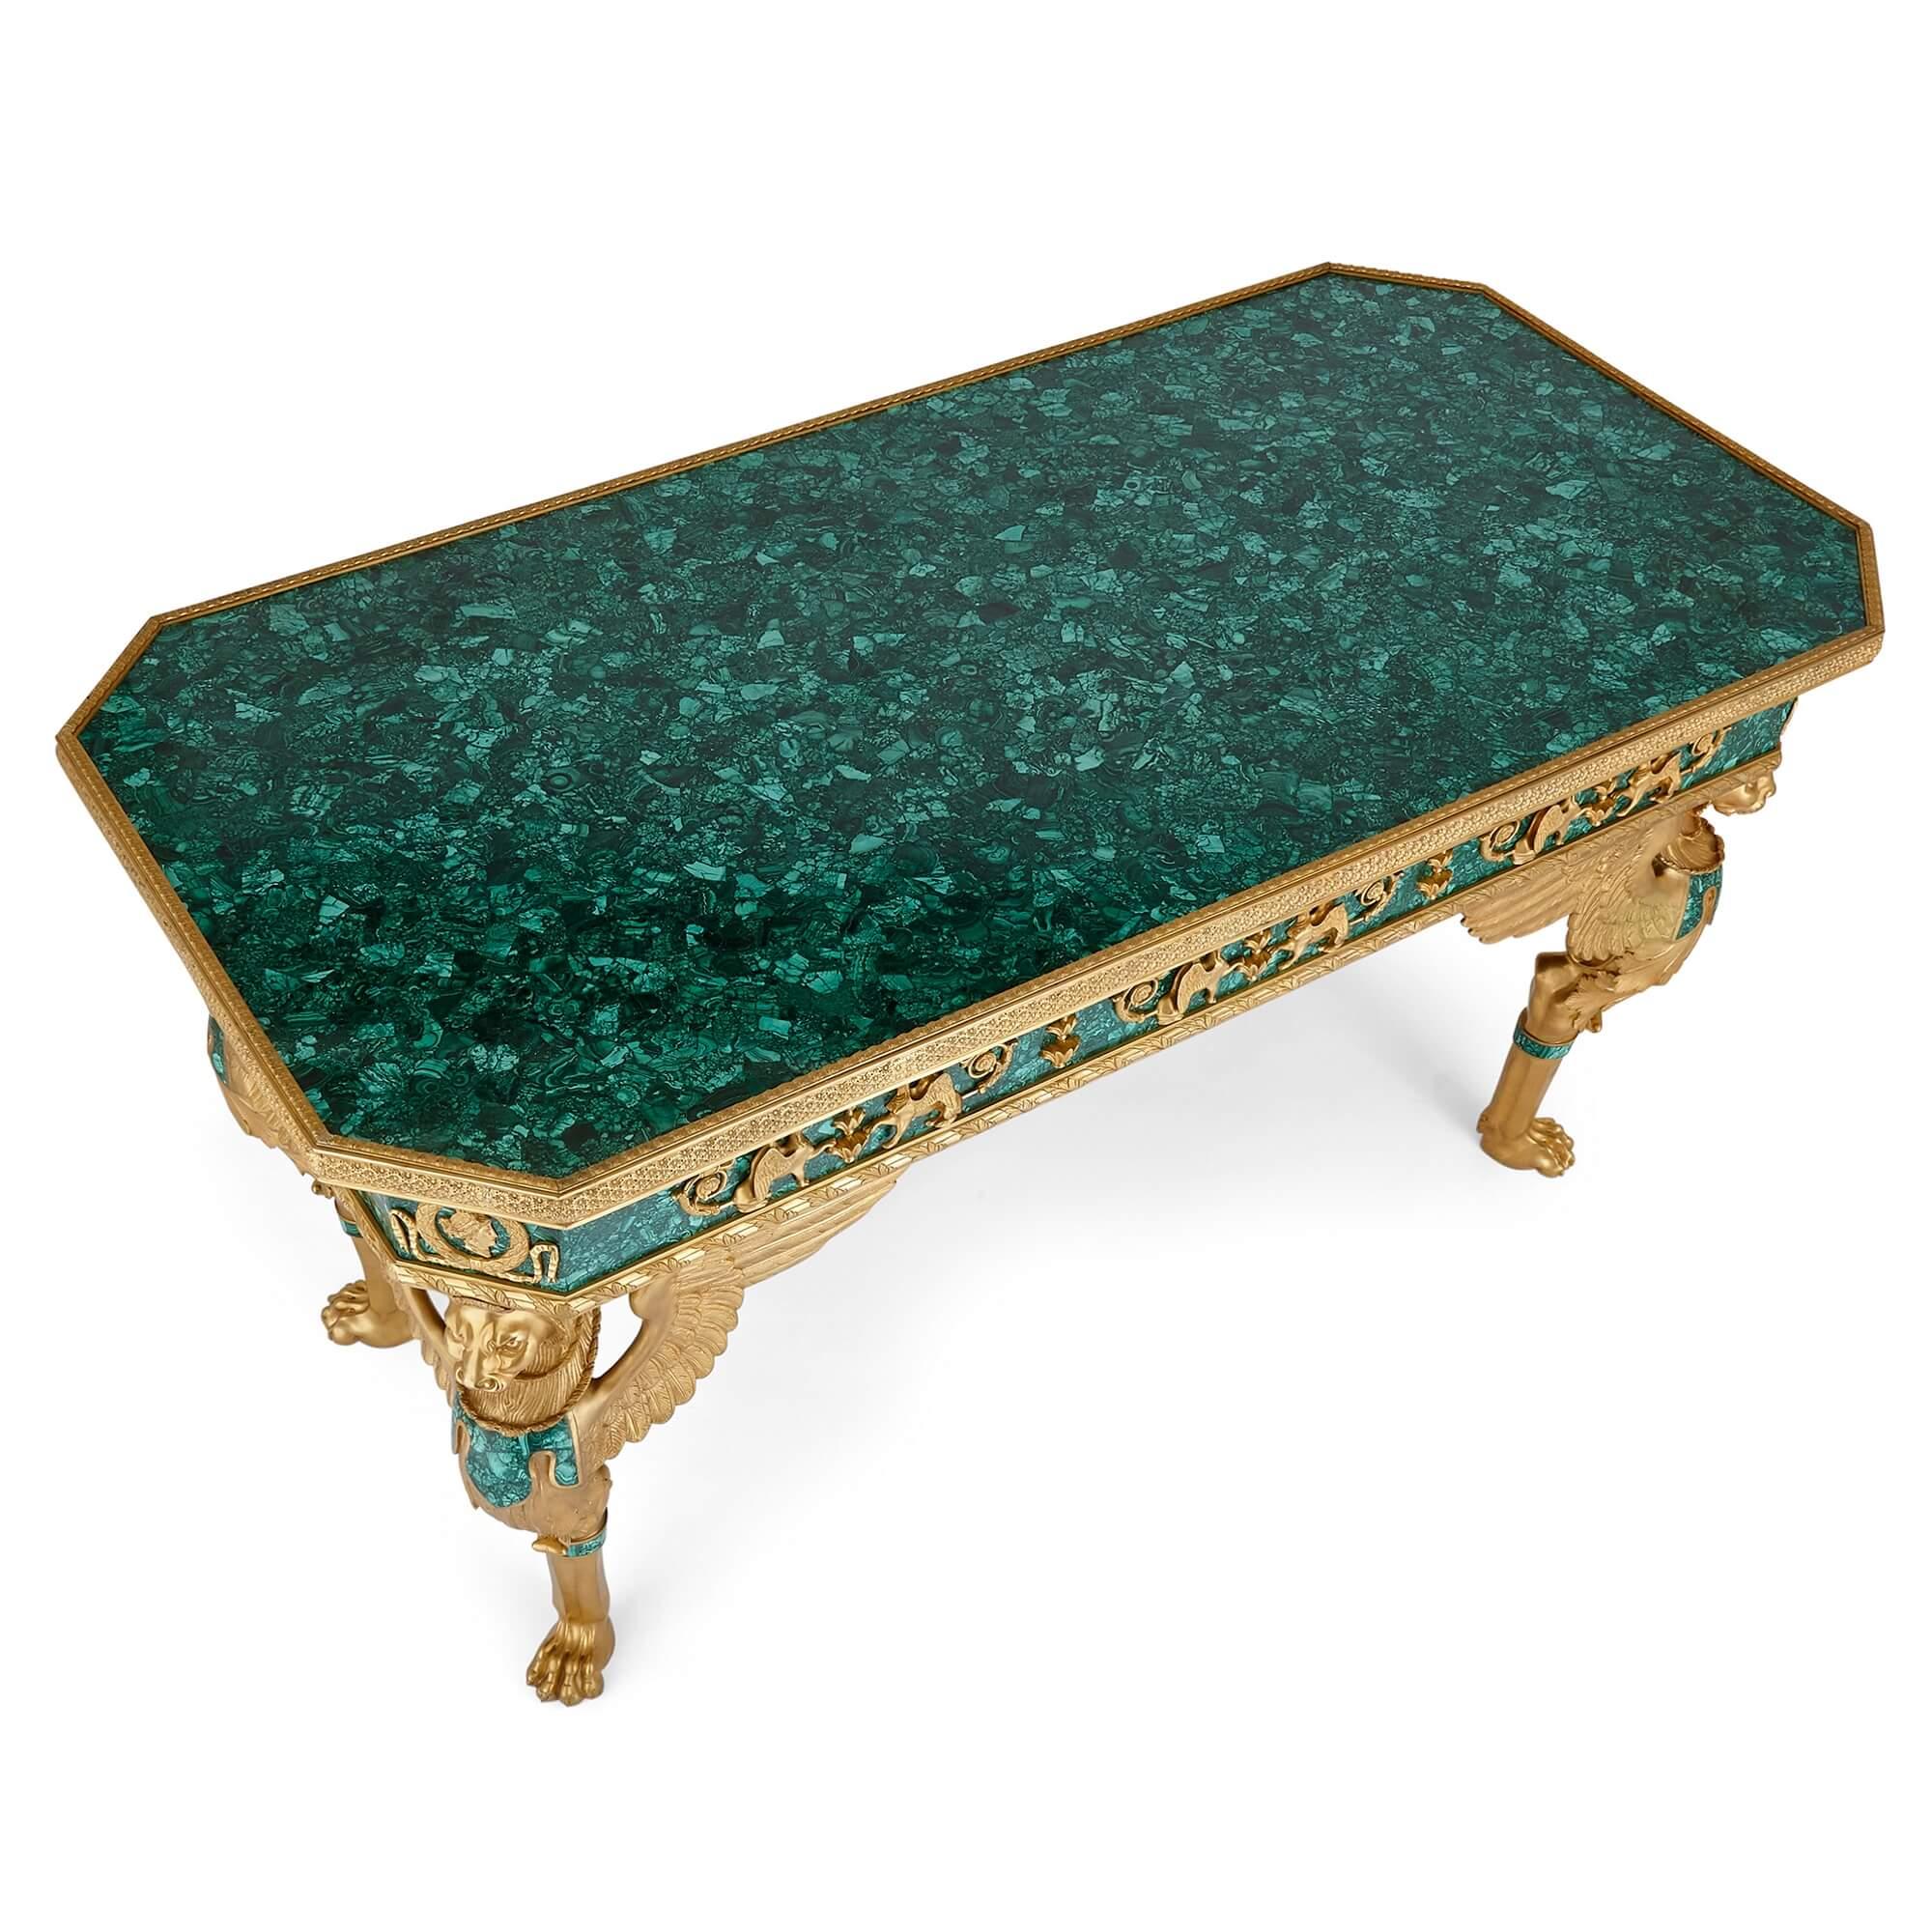 20th Century Large French Empire Style Gilt-Bronze and Malachite Centre Table For Sale